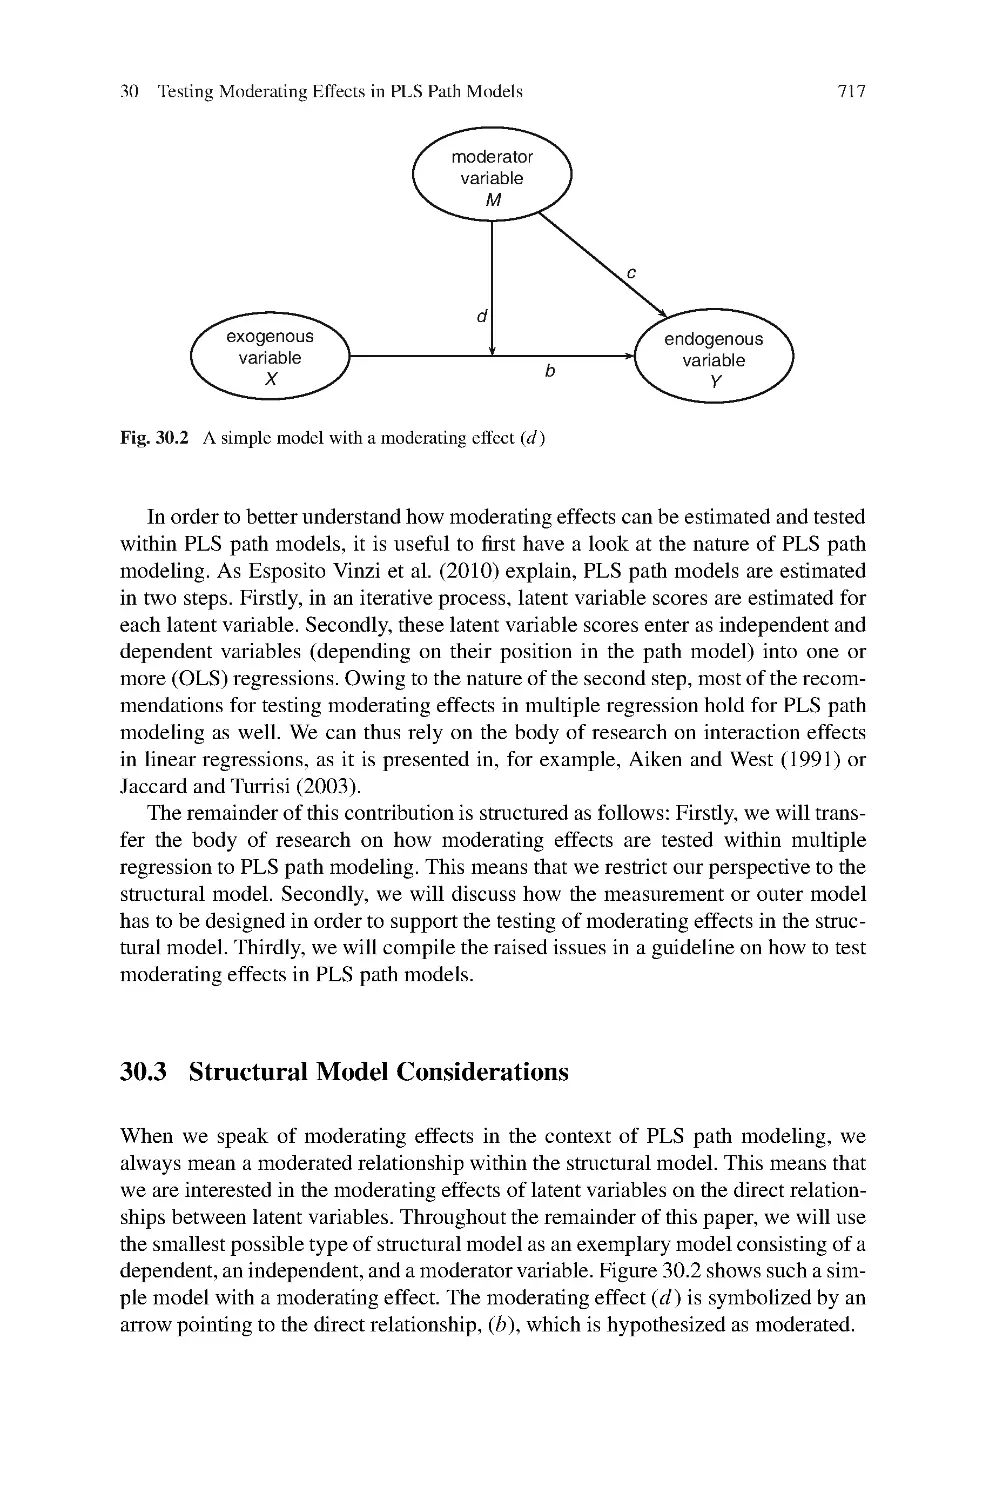 30.3 Structural Model Considerations